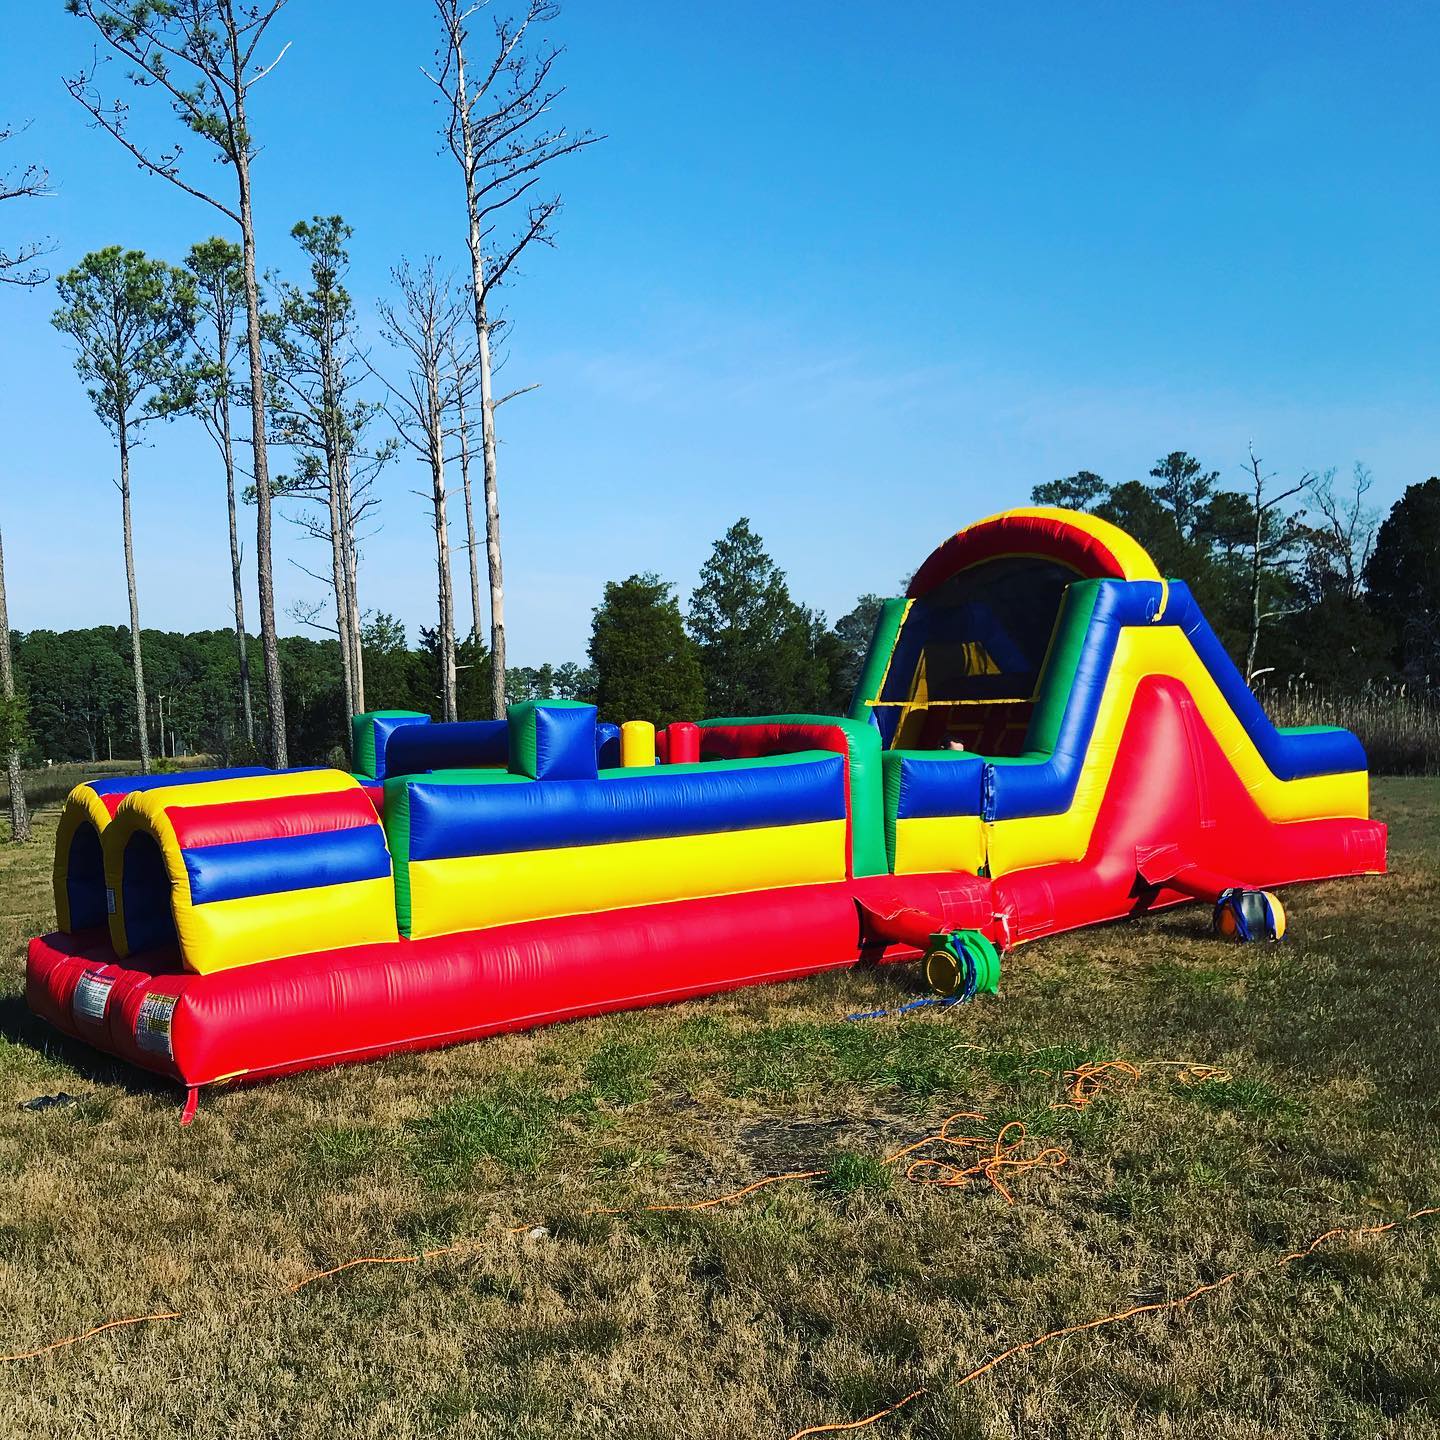 Lanexa Obstacle Course Rentals